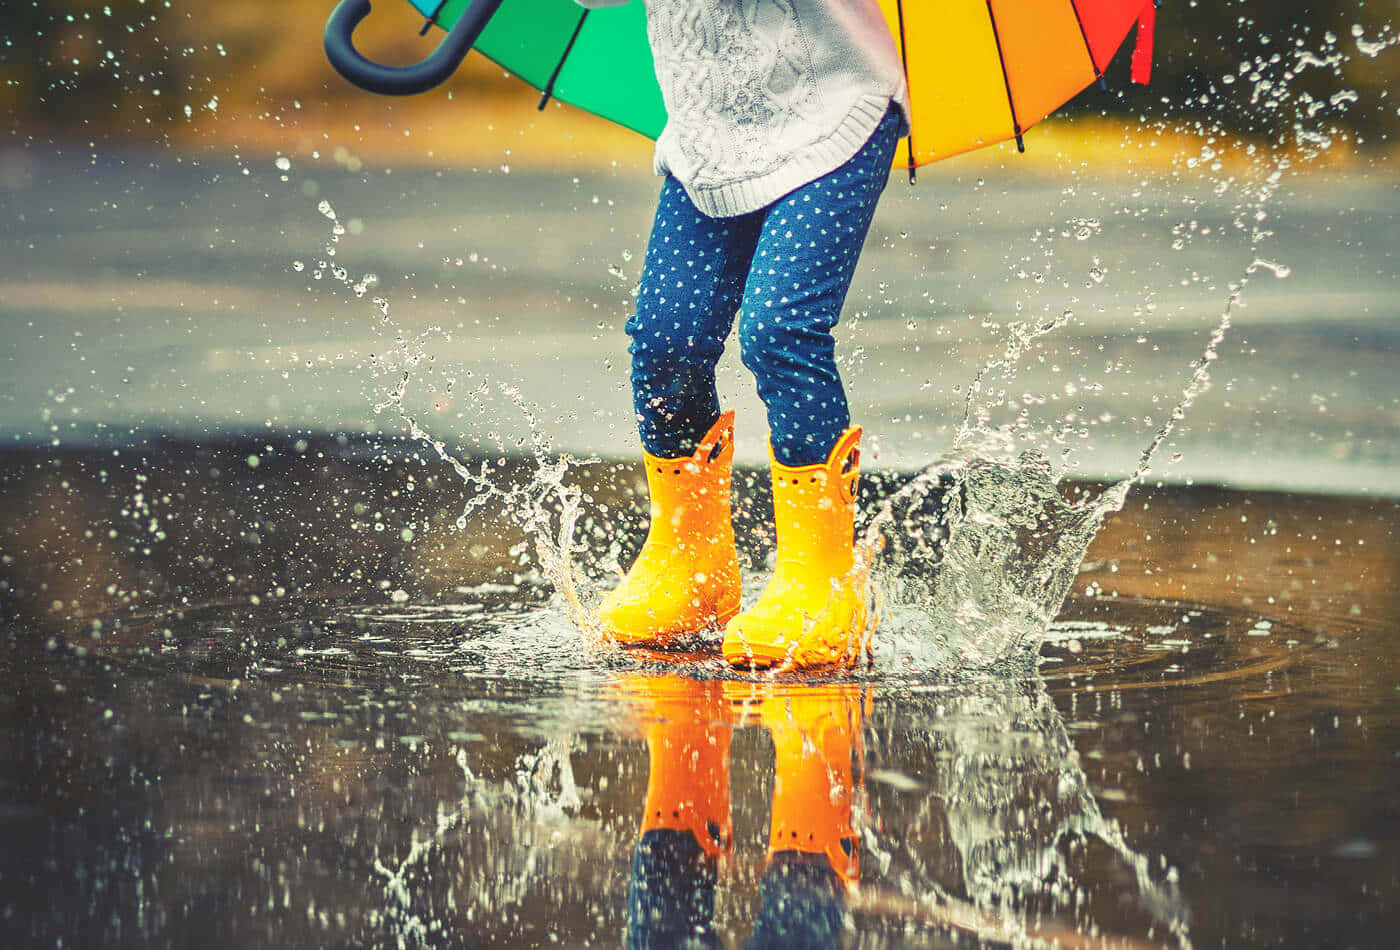 Jumping On Puddle With Colorful Umbrella During Rainy Day Picture